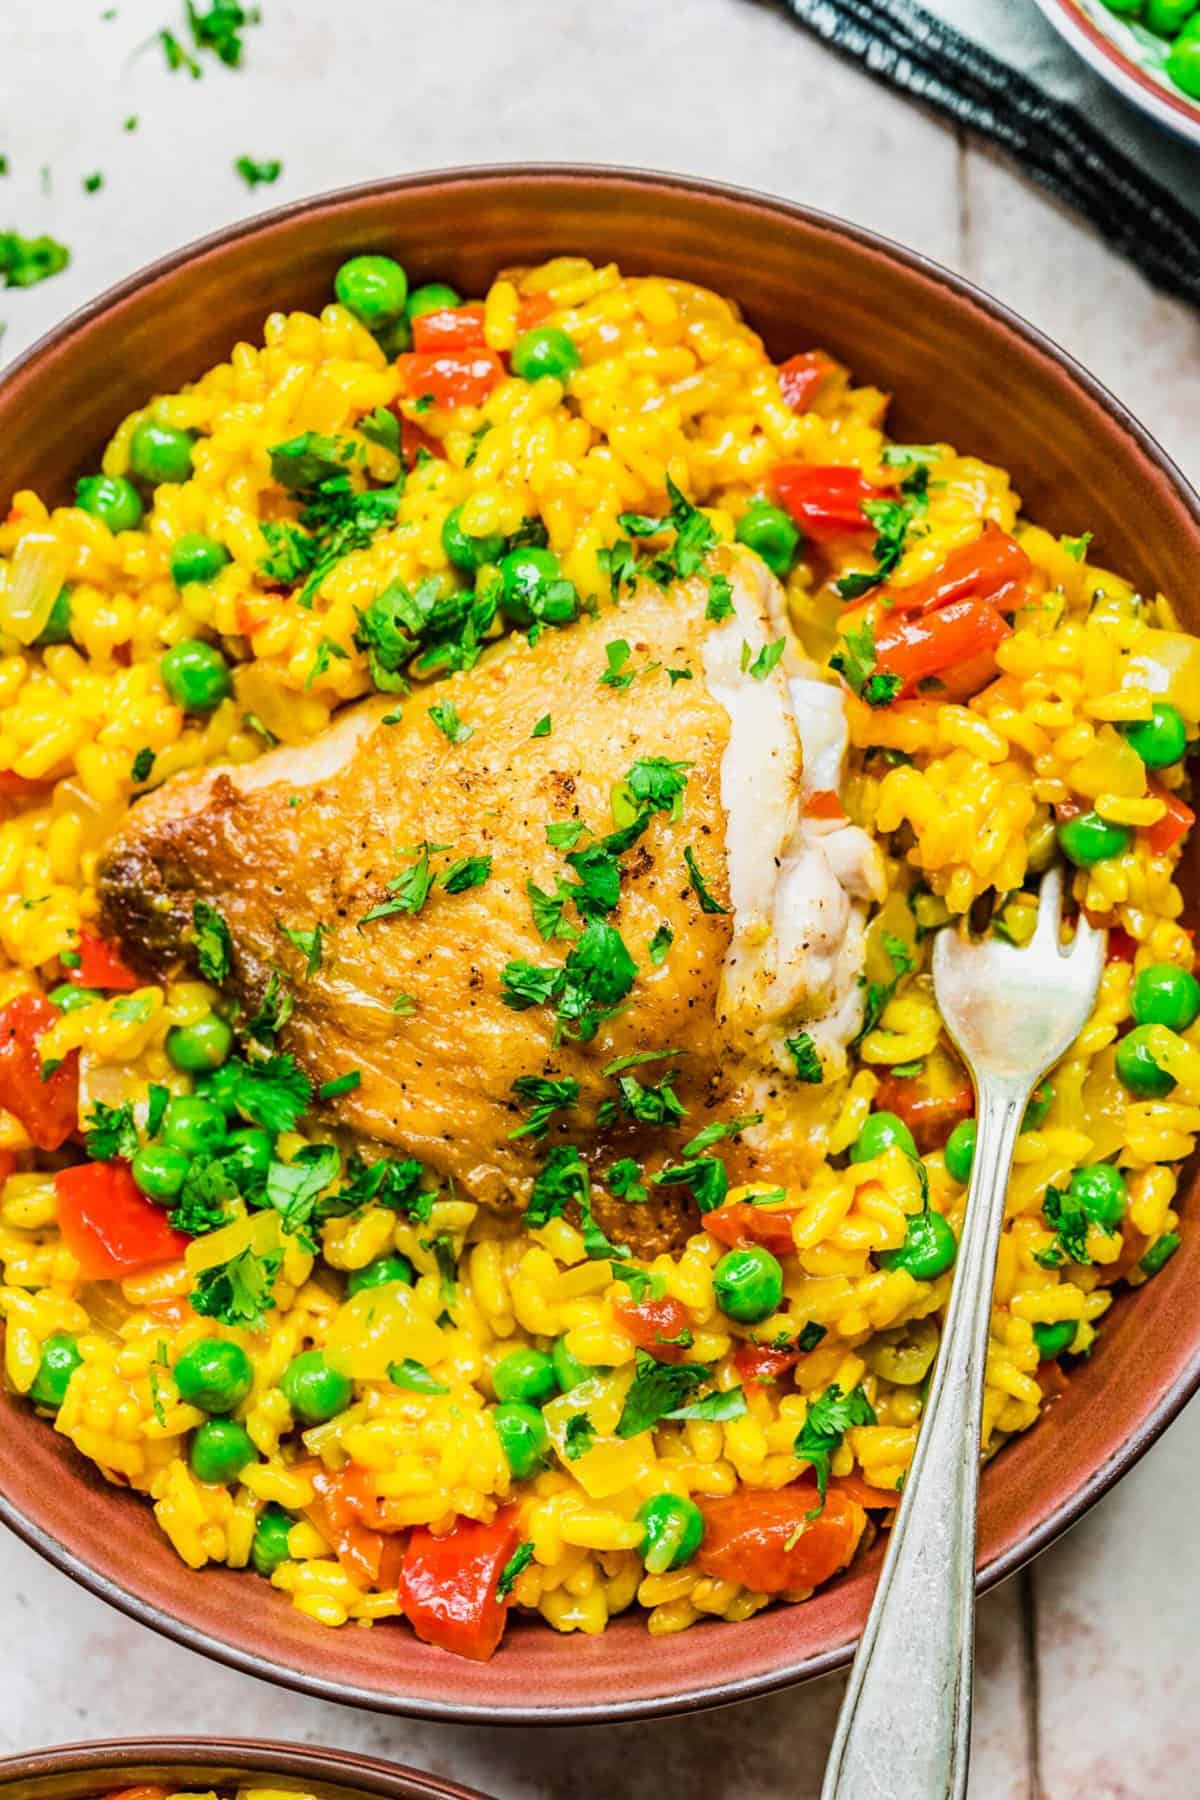 Overhead view of arroz con pollo in bowl with fork